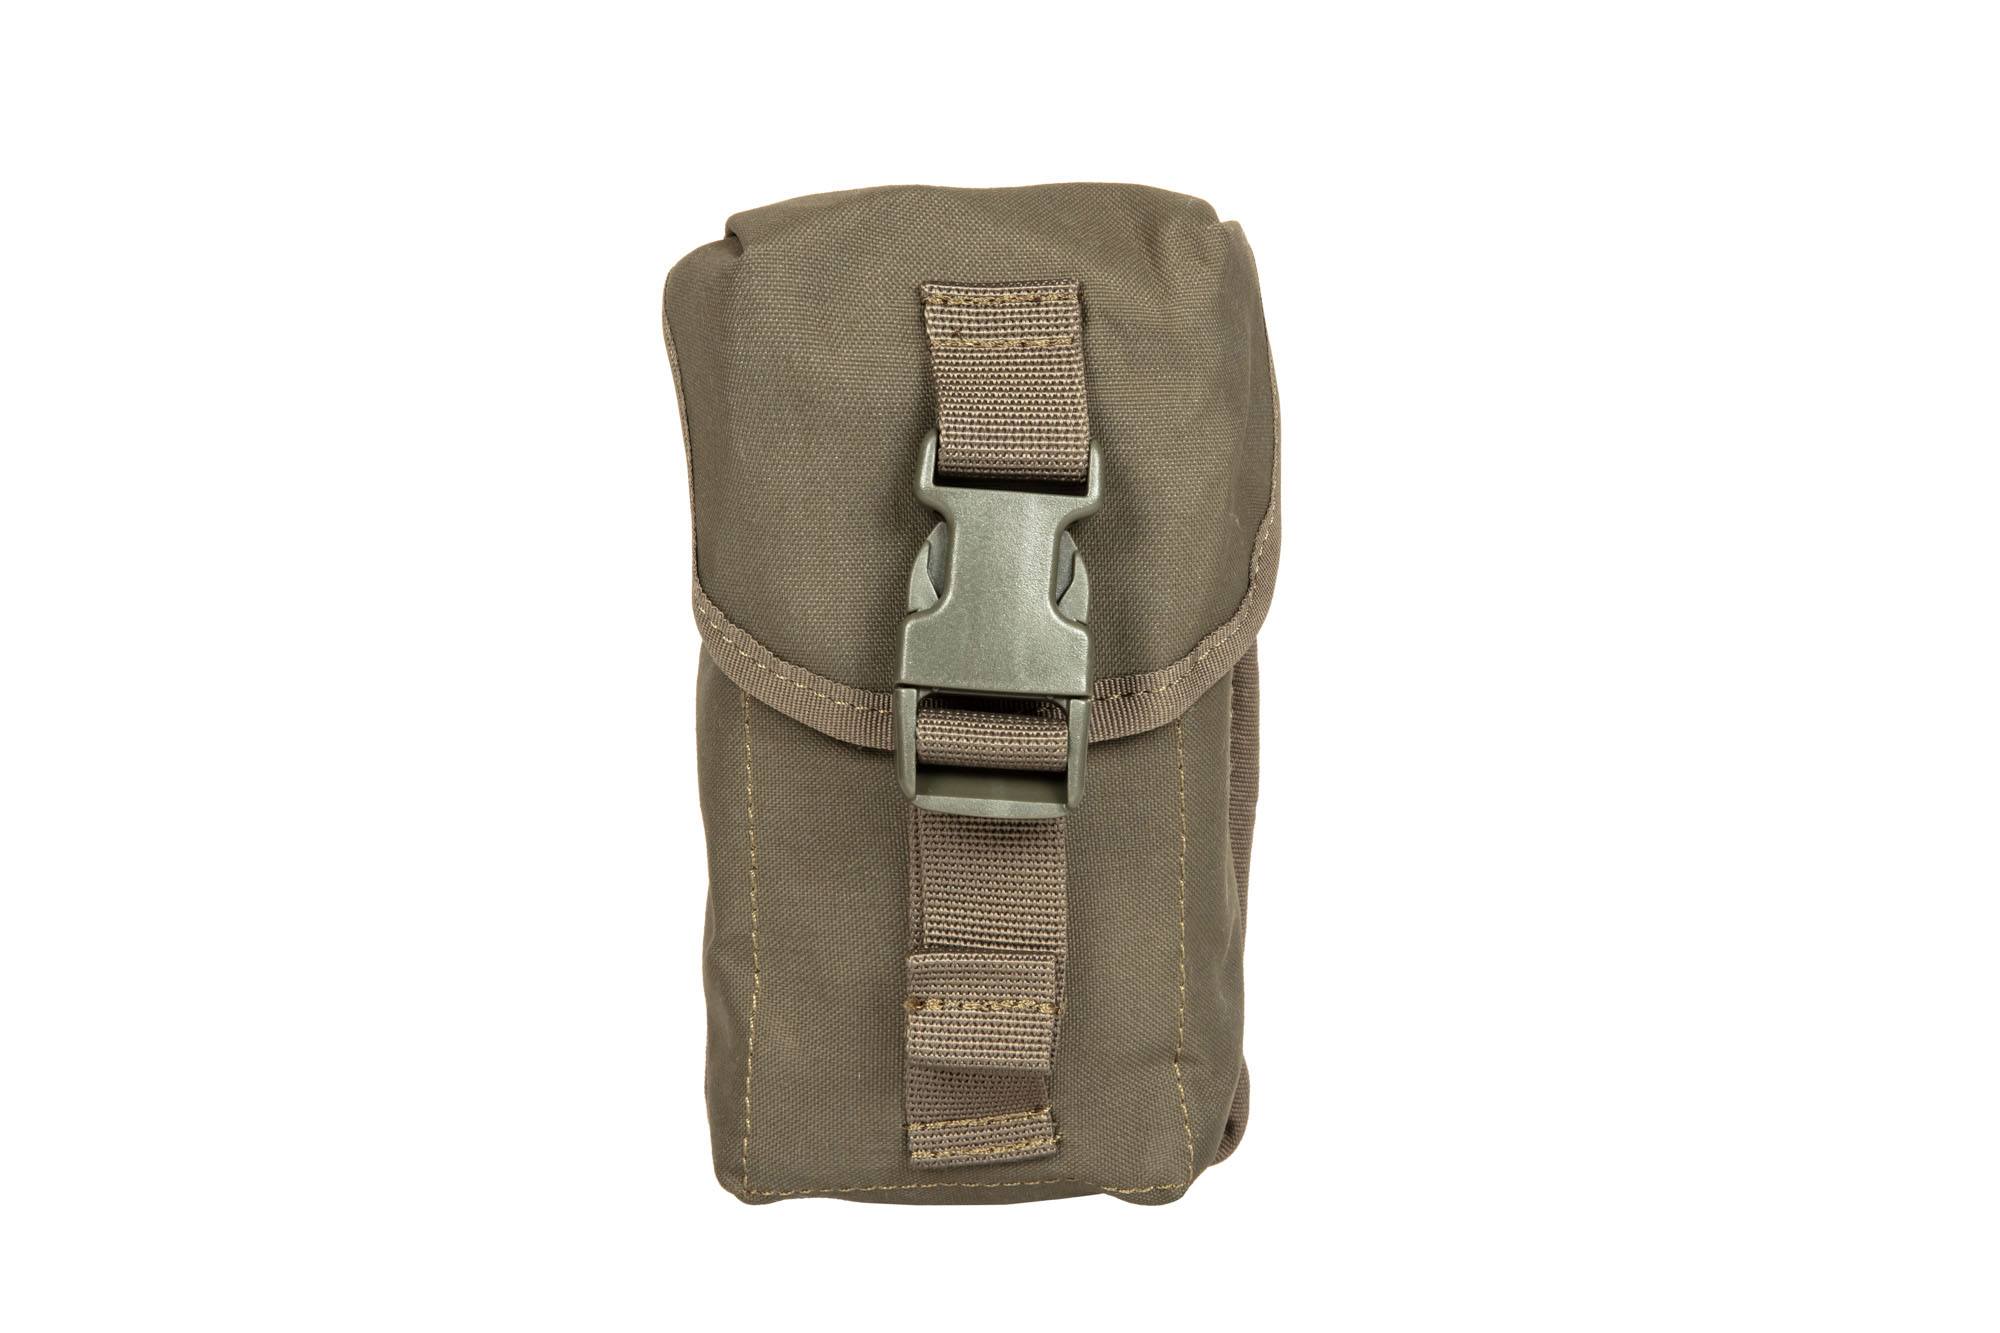 Groot pouch All-Purpose Pidae - Olijf